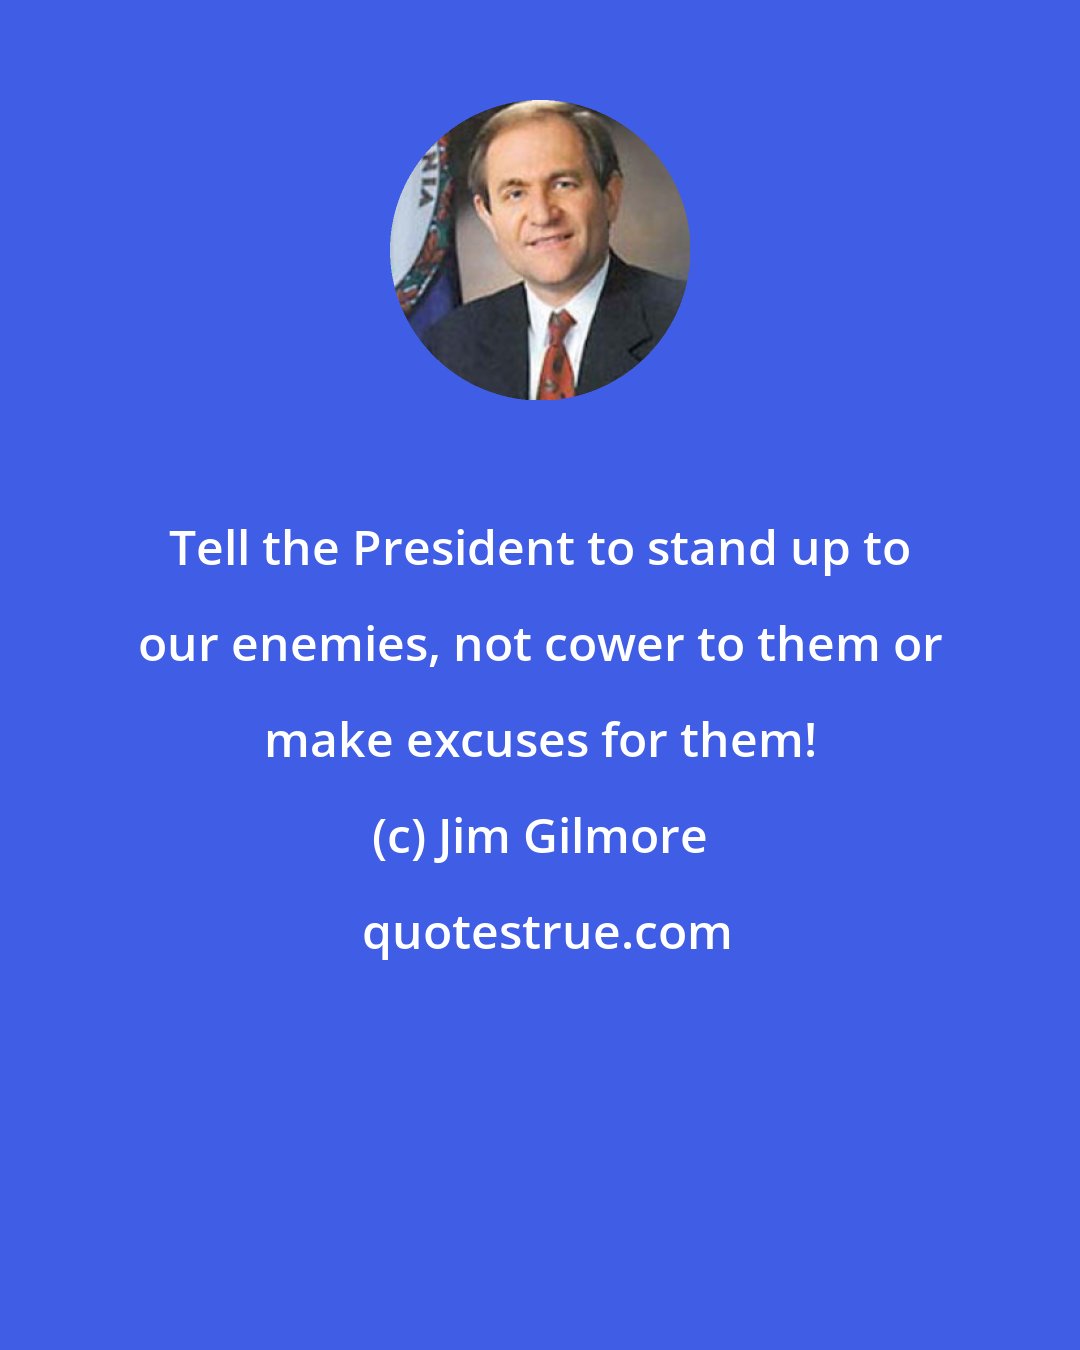 Jim Gilmore: Tell the President to stand up to our enemies, not cower to them or make excuses for them!